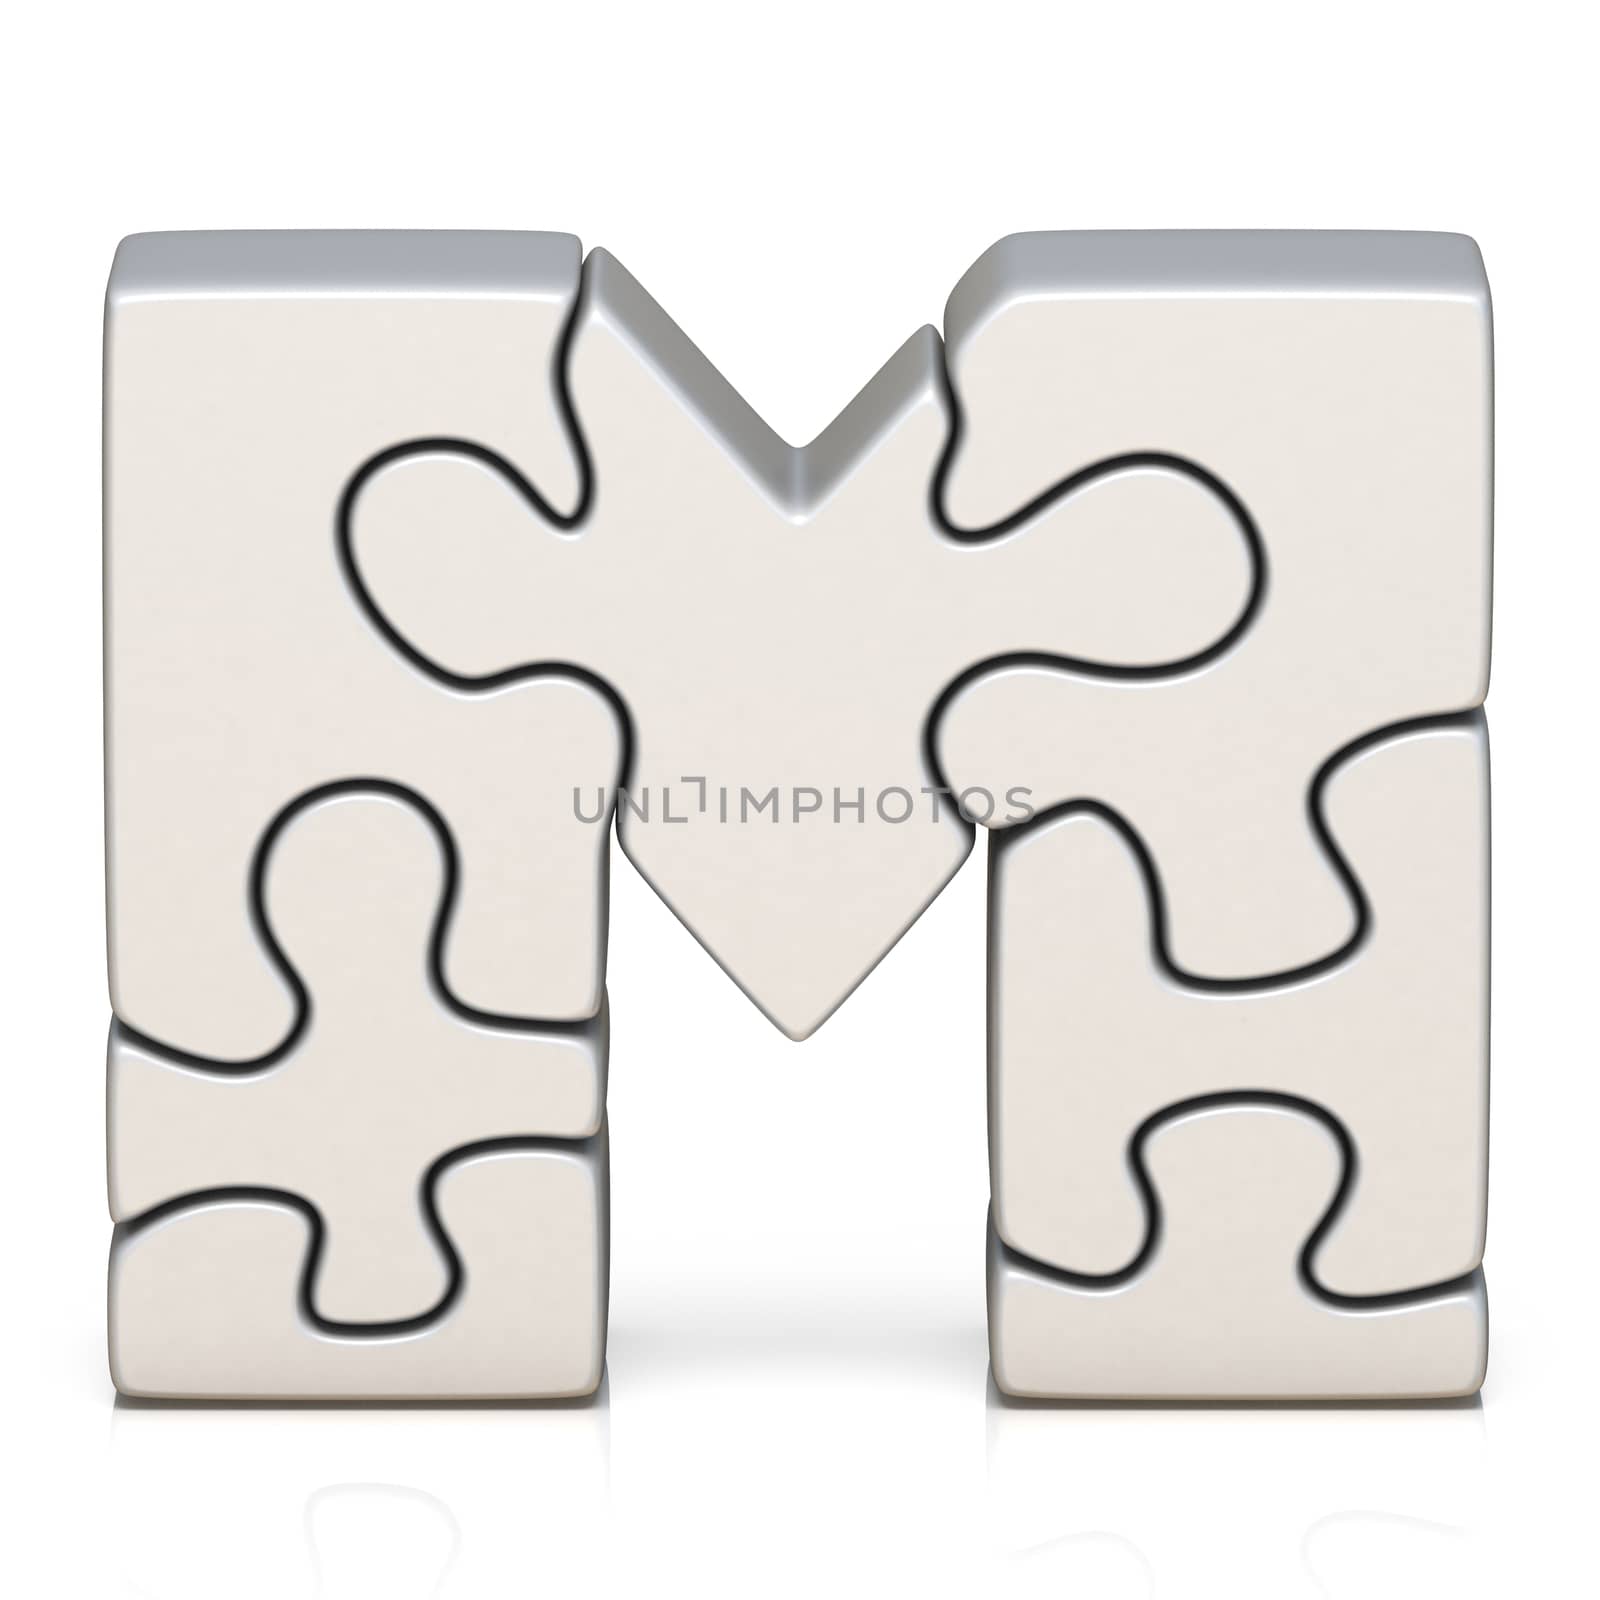 White puzzle jigsaw letter M 3D render illustration isolated on white background